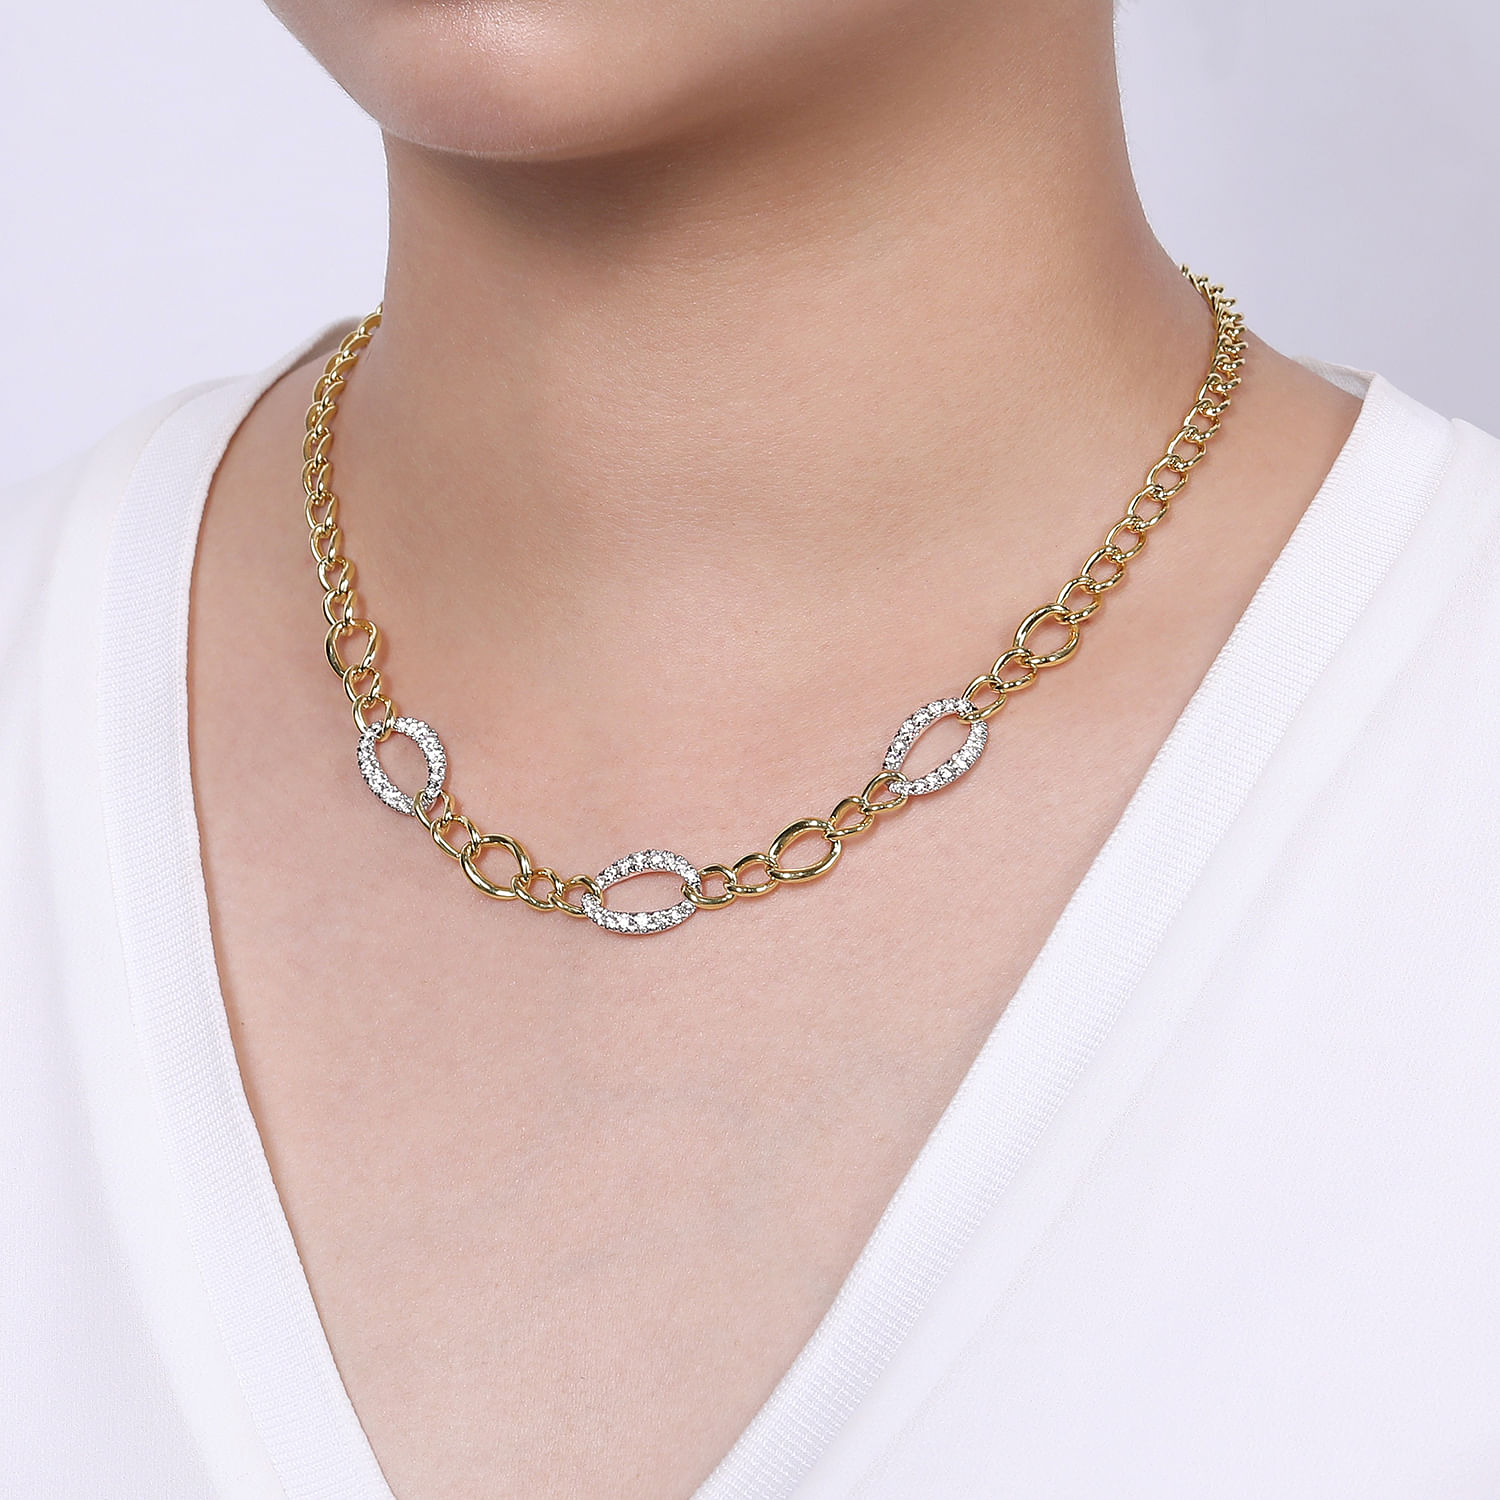 14K Yellow-White Gold Oval Chain Link Necklace with Diamond Pavé